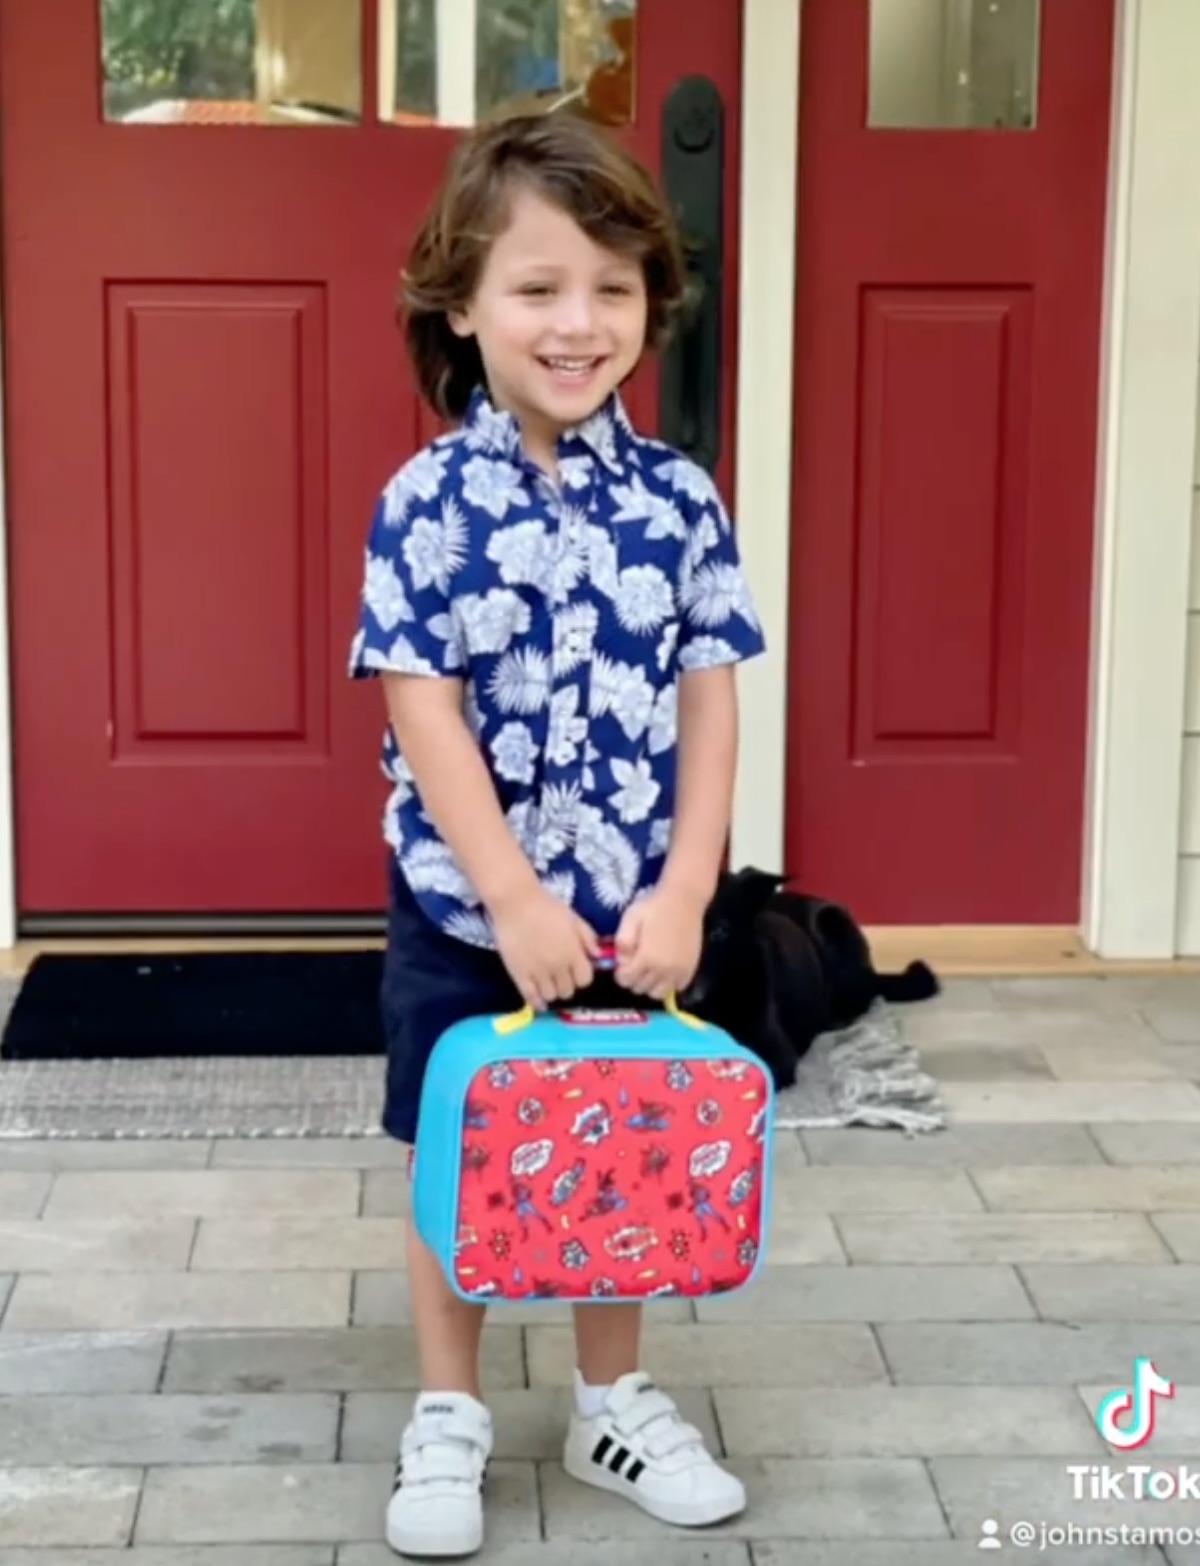 John Stamos and More Celebs Share Their Kids' 2021 Back to School Pics